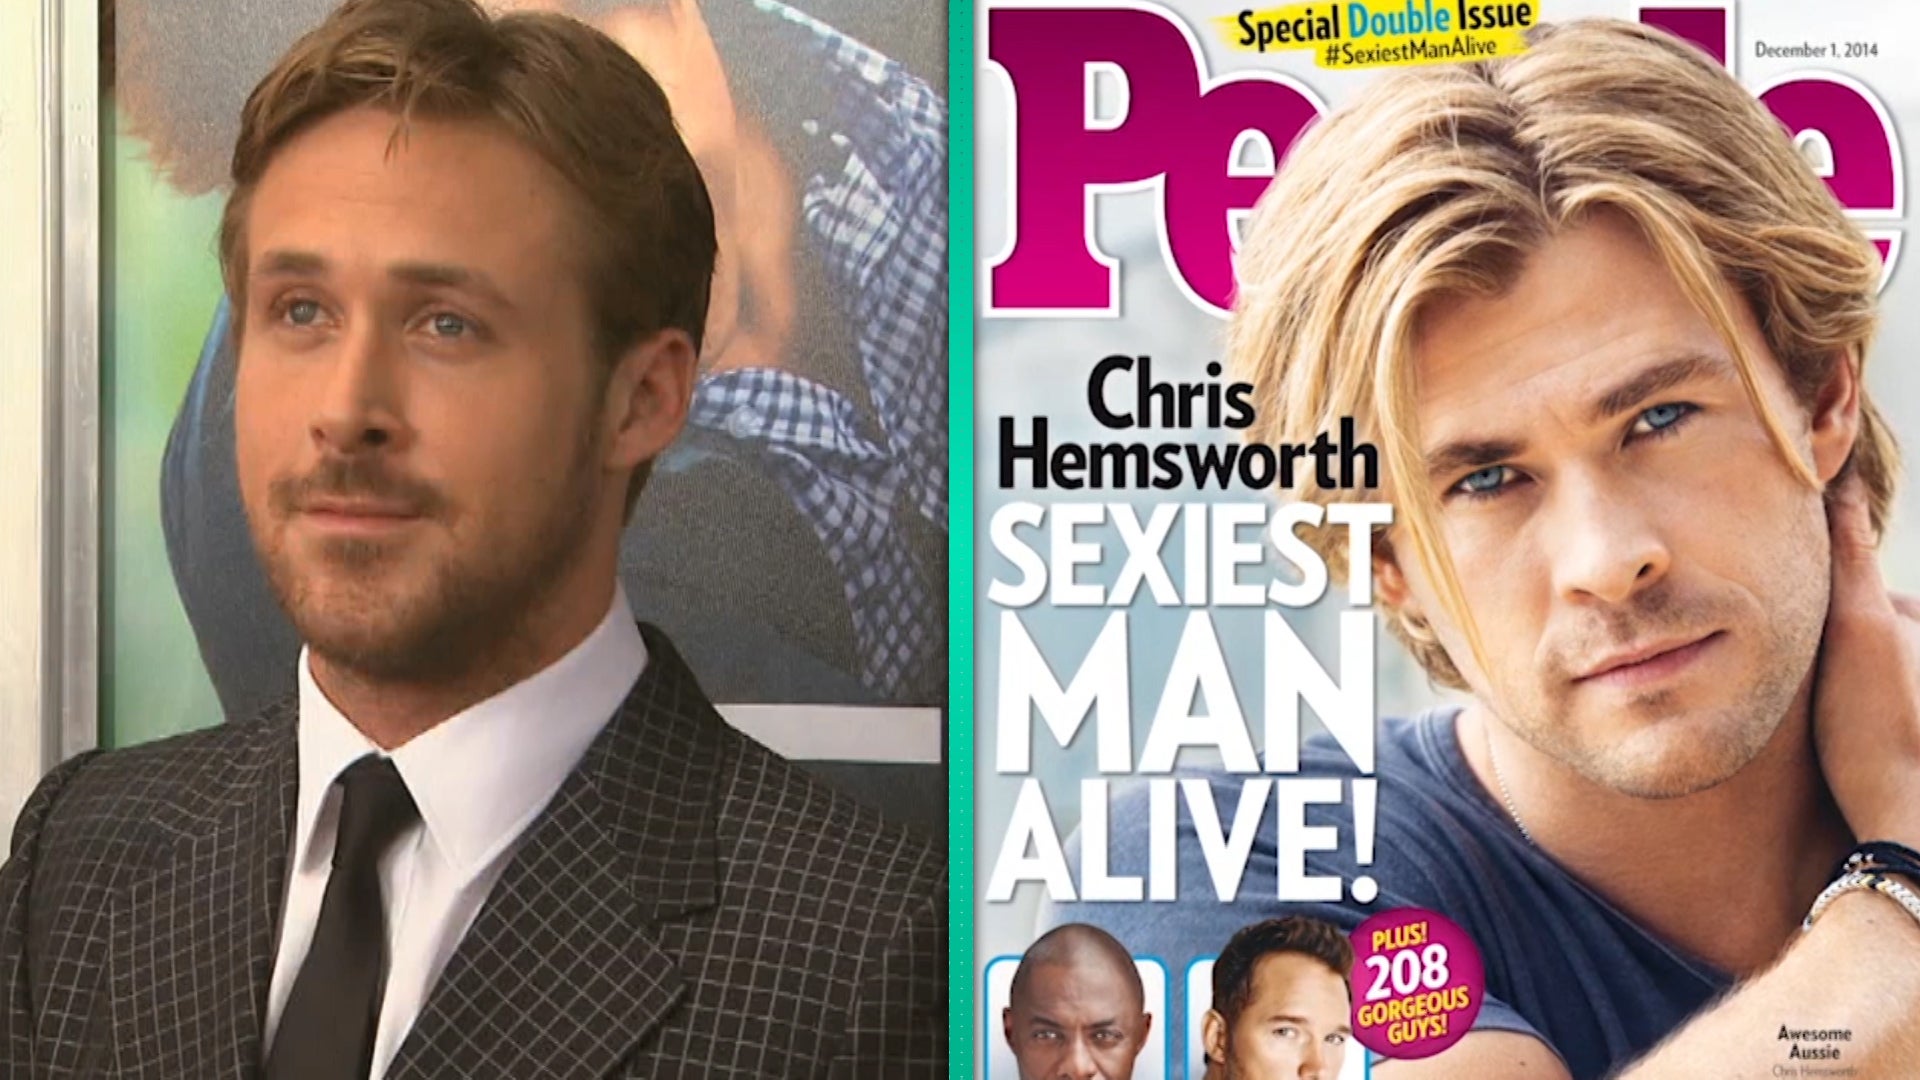 Every Guy Who Has Been on the Cover of People's Sexiest Man Alive